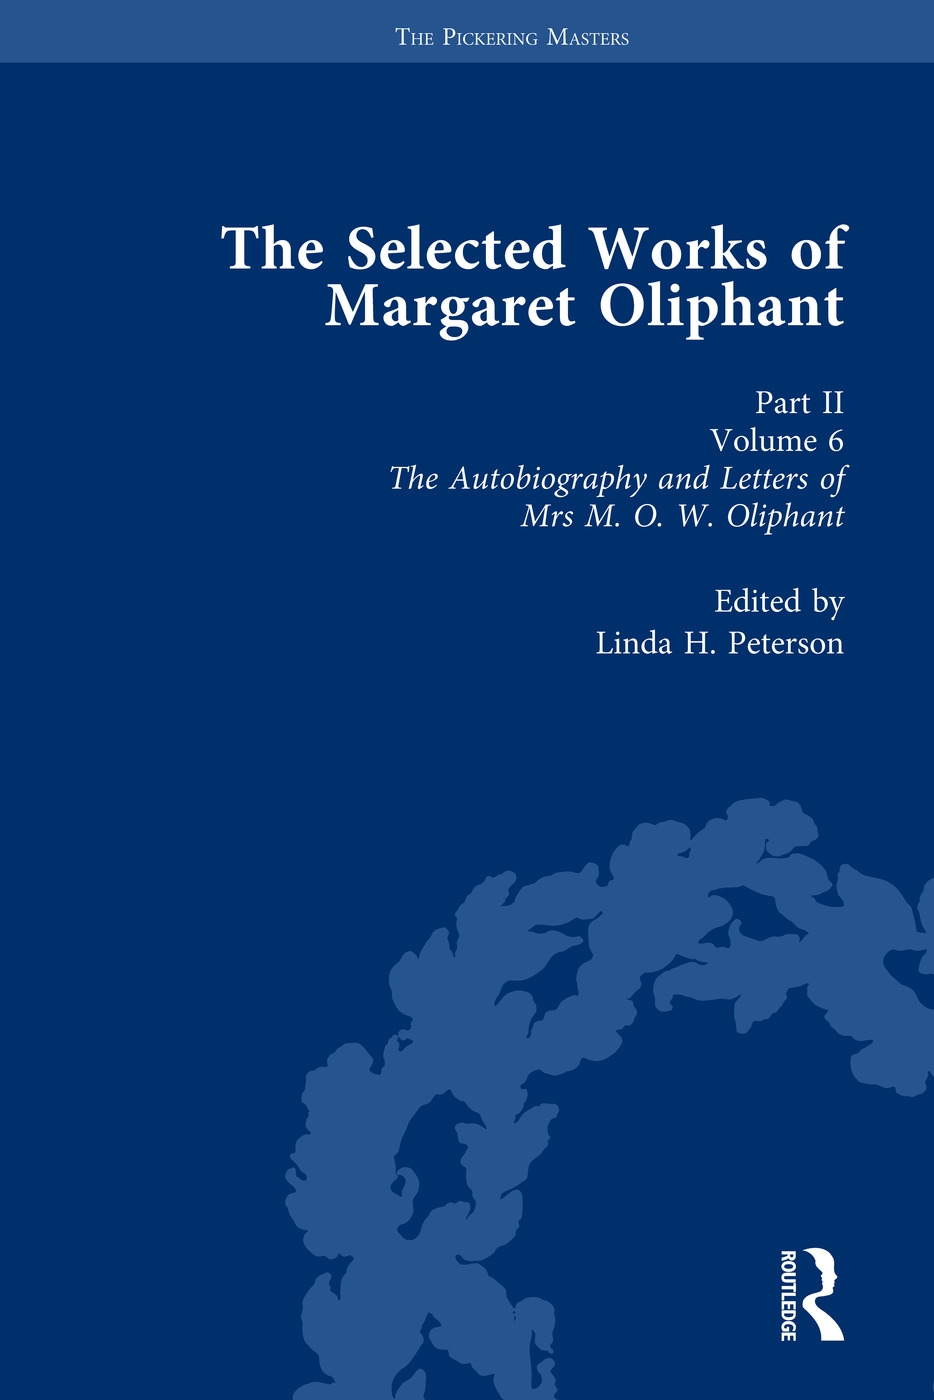 The Selected Works of Margaret Oliphant, Part II Volume 6: The Autobiography and Letters of Mrs M.O.W. Oliphant (1899)